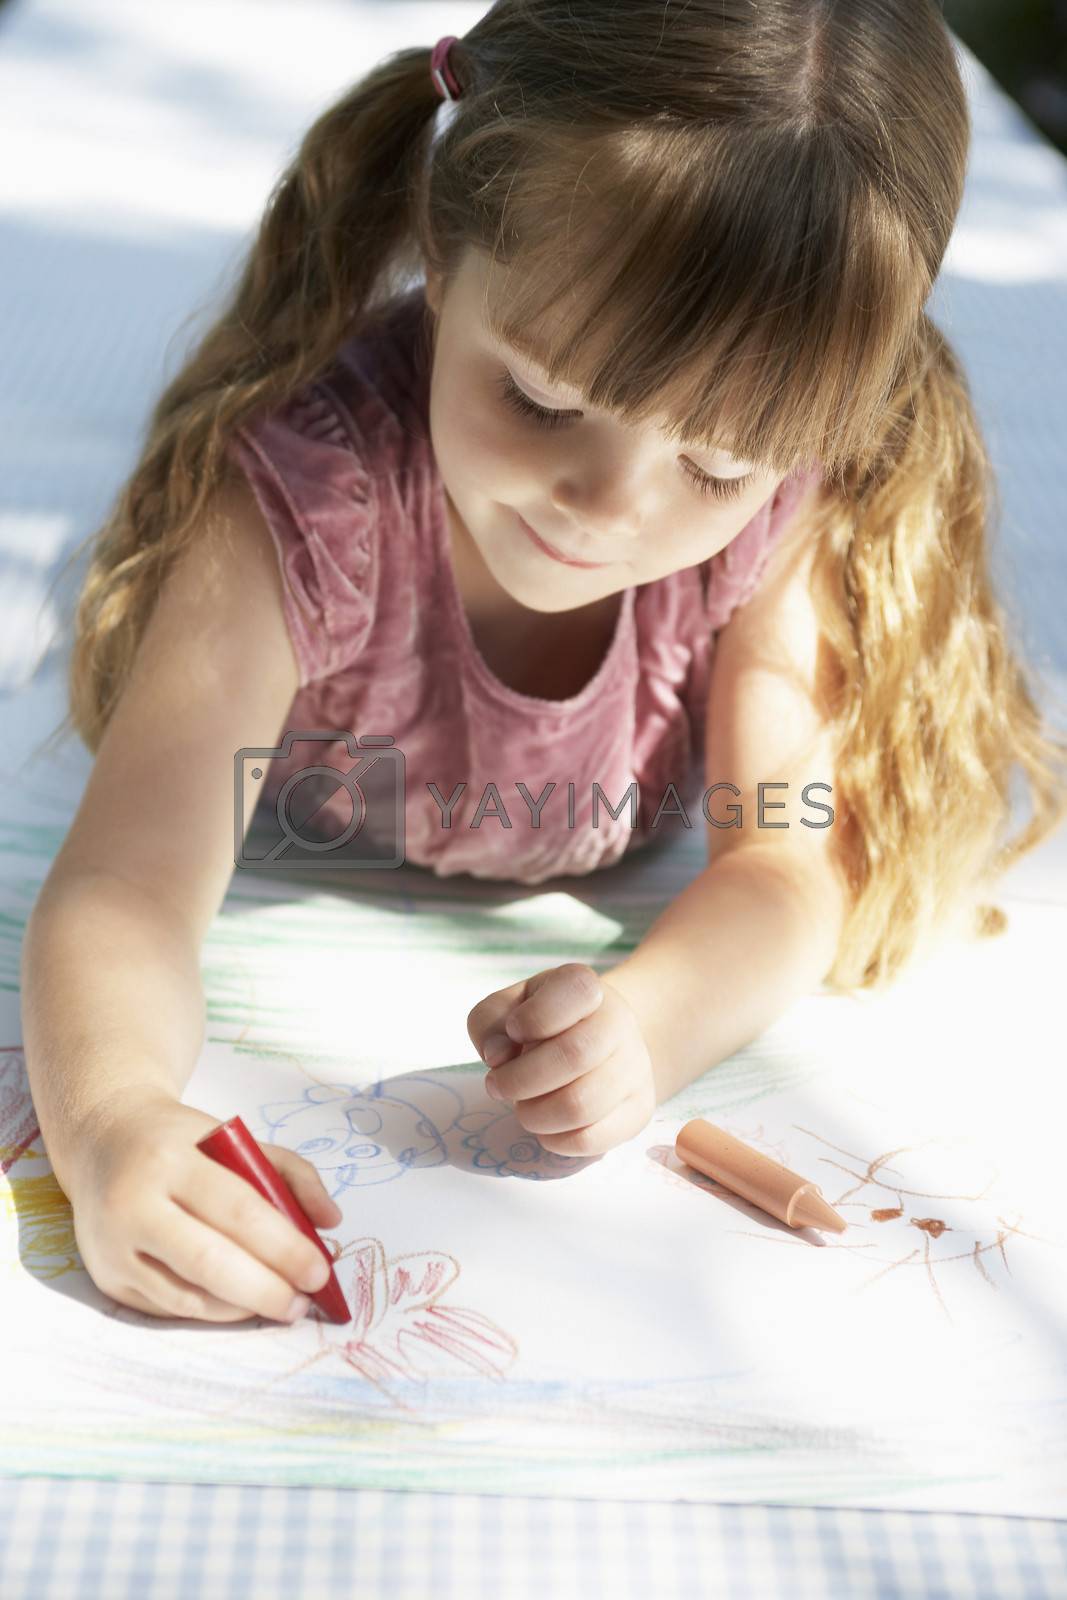 Royalty free image of Young girl lying on backyard table and drawing by moodboard